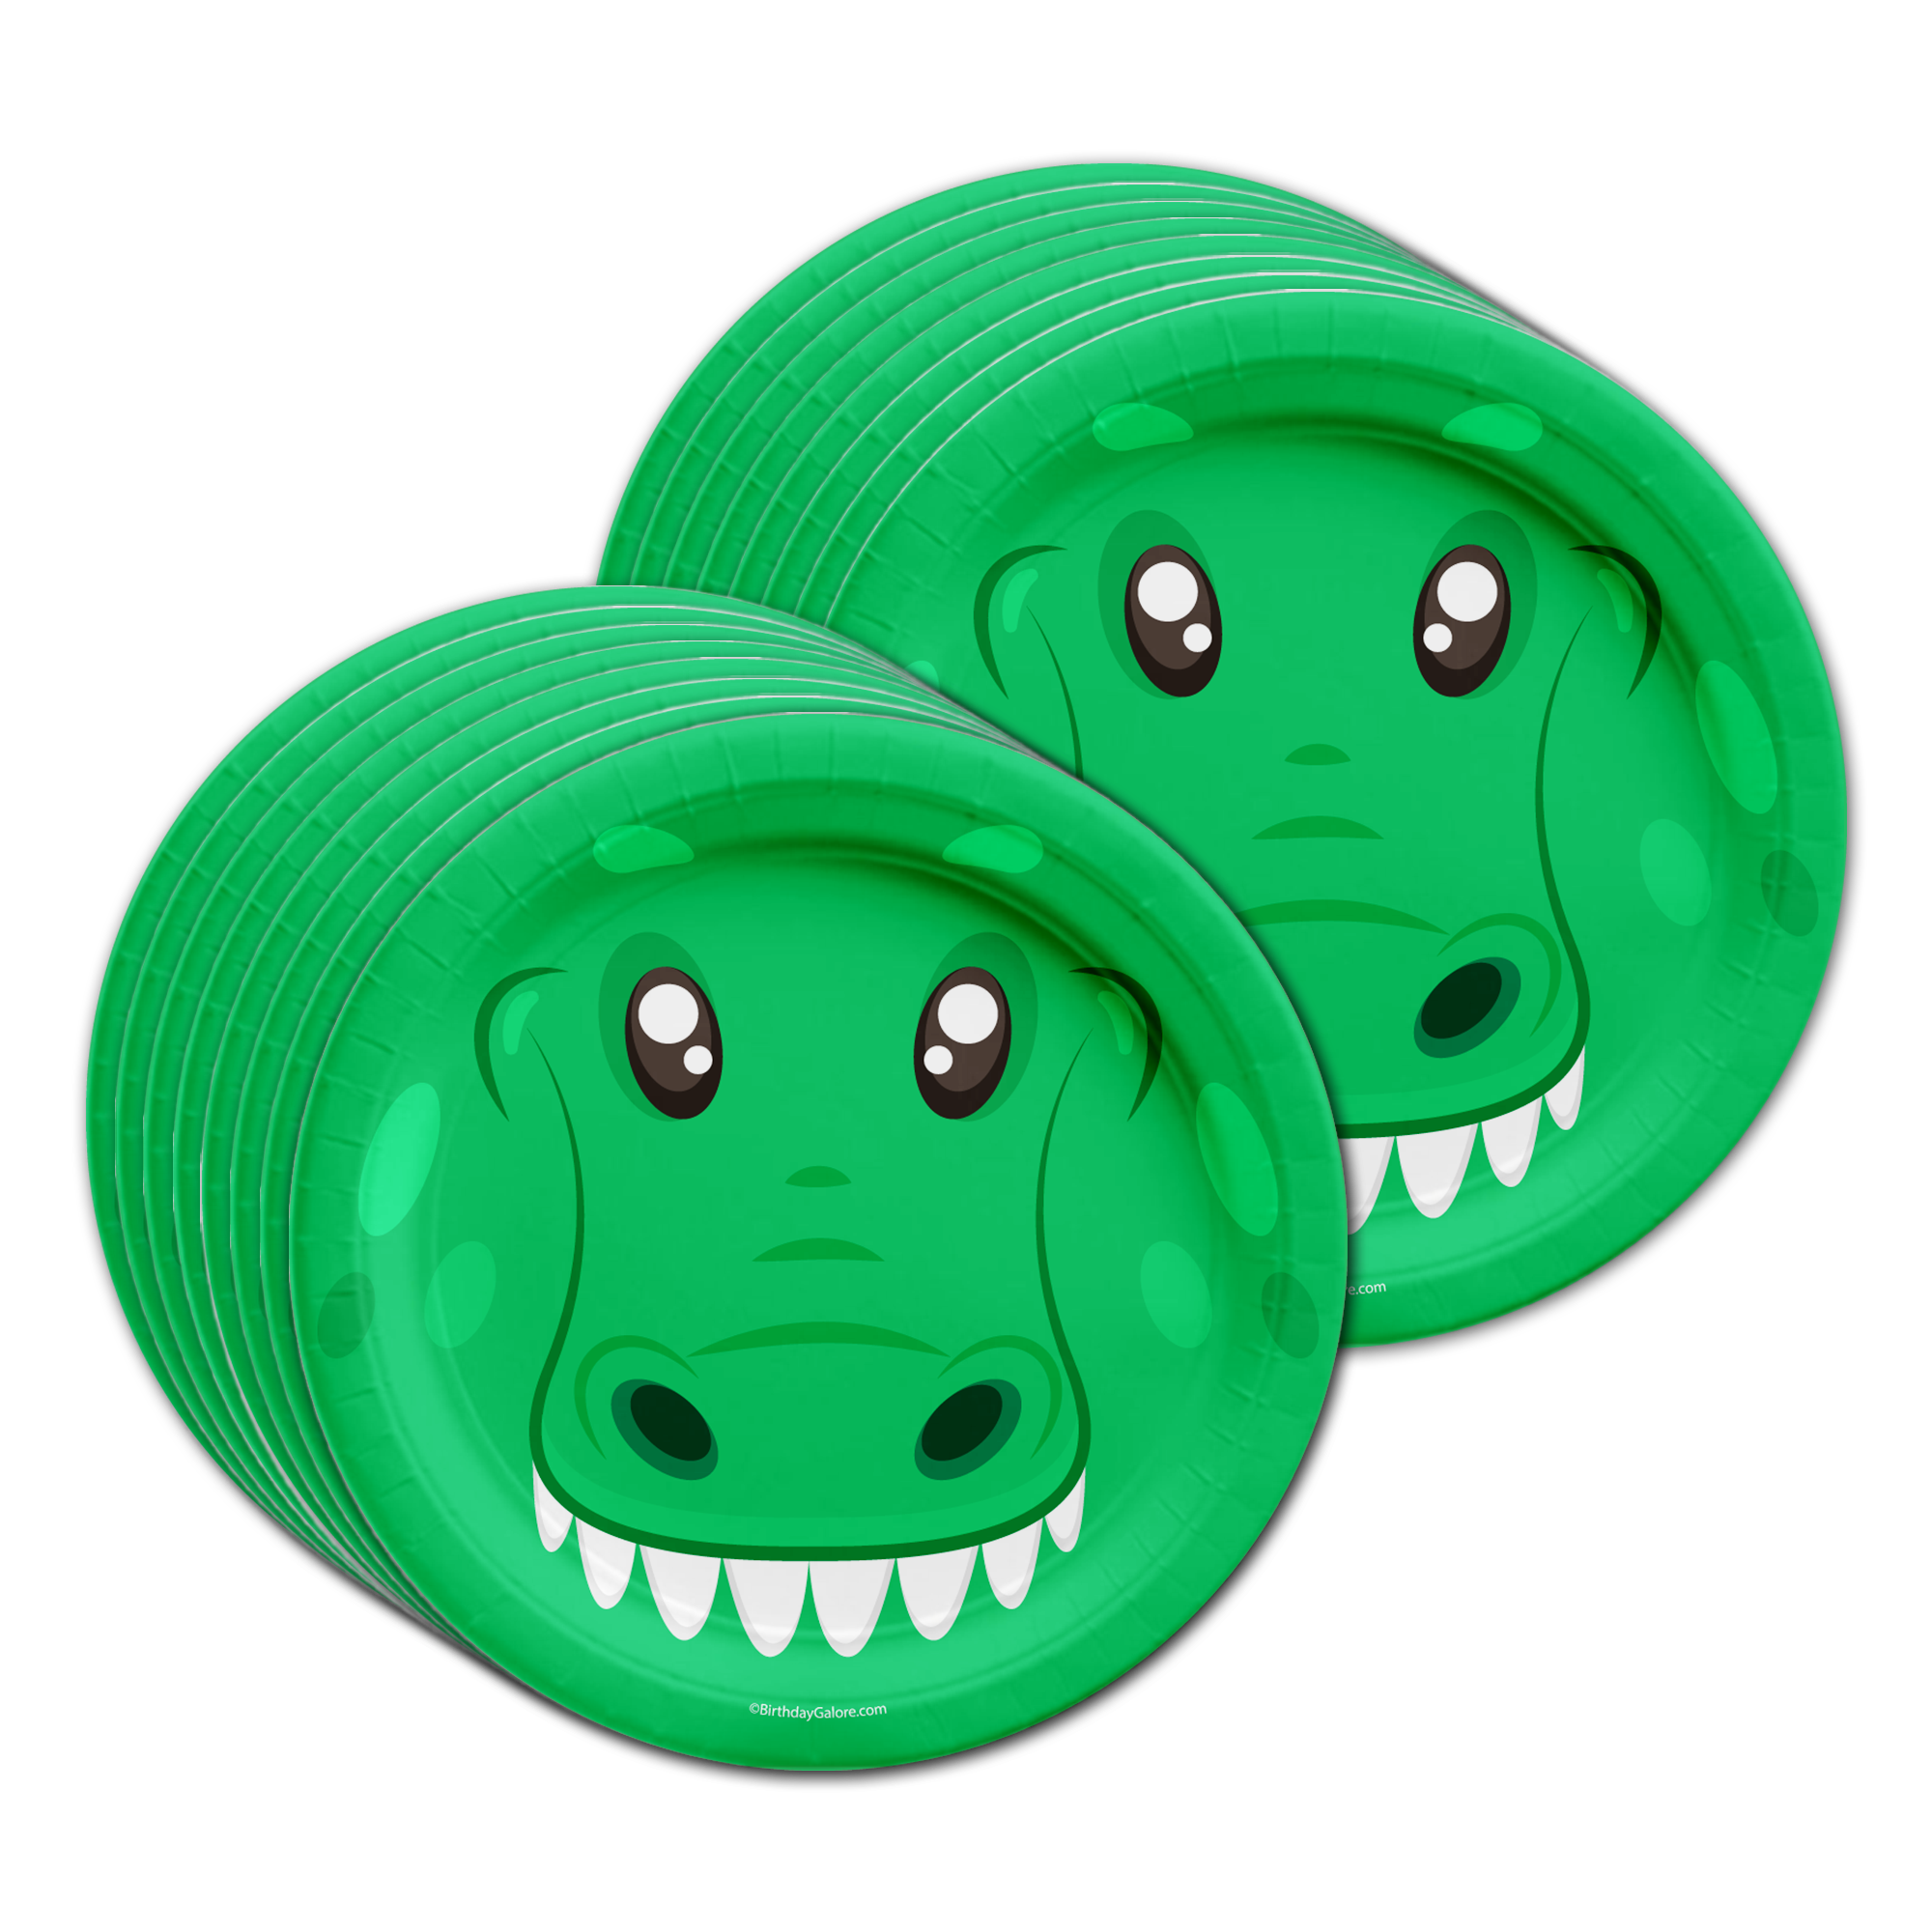 Alligator Birthday Party Tableware Kit For 16 Guests